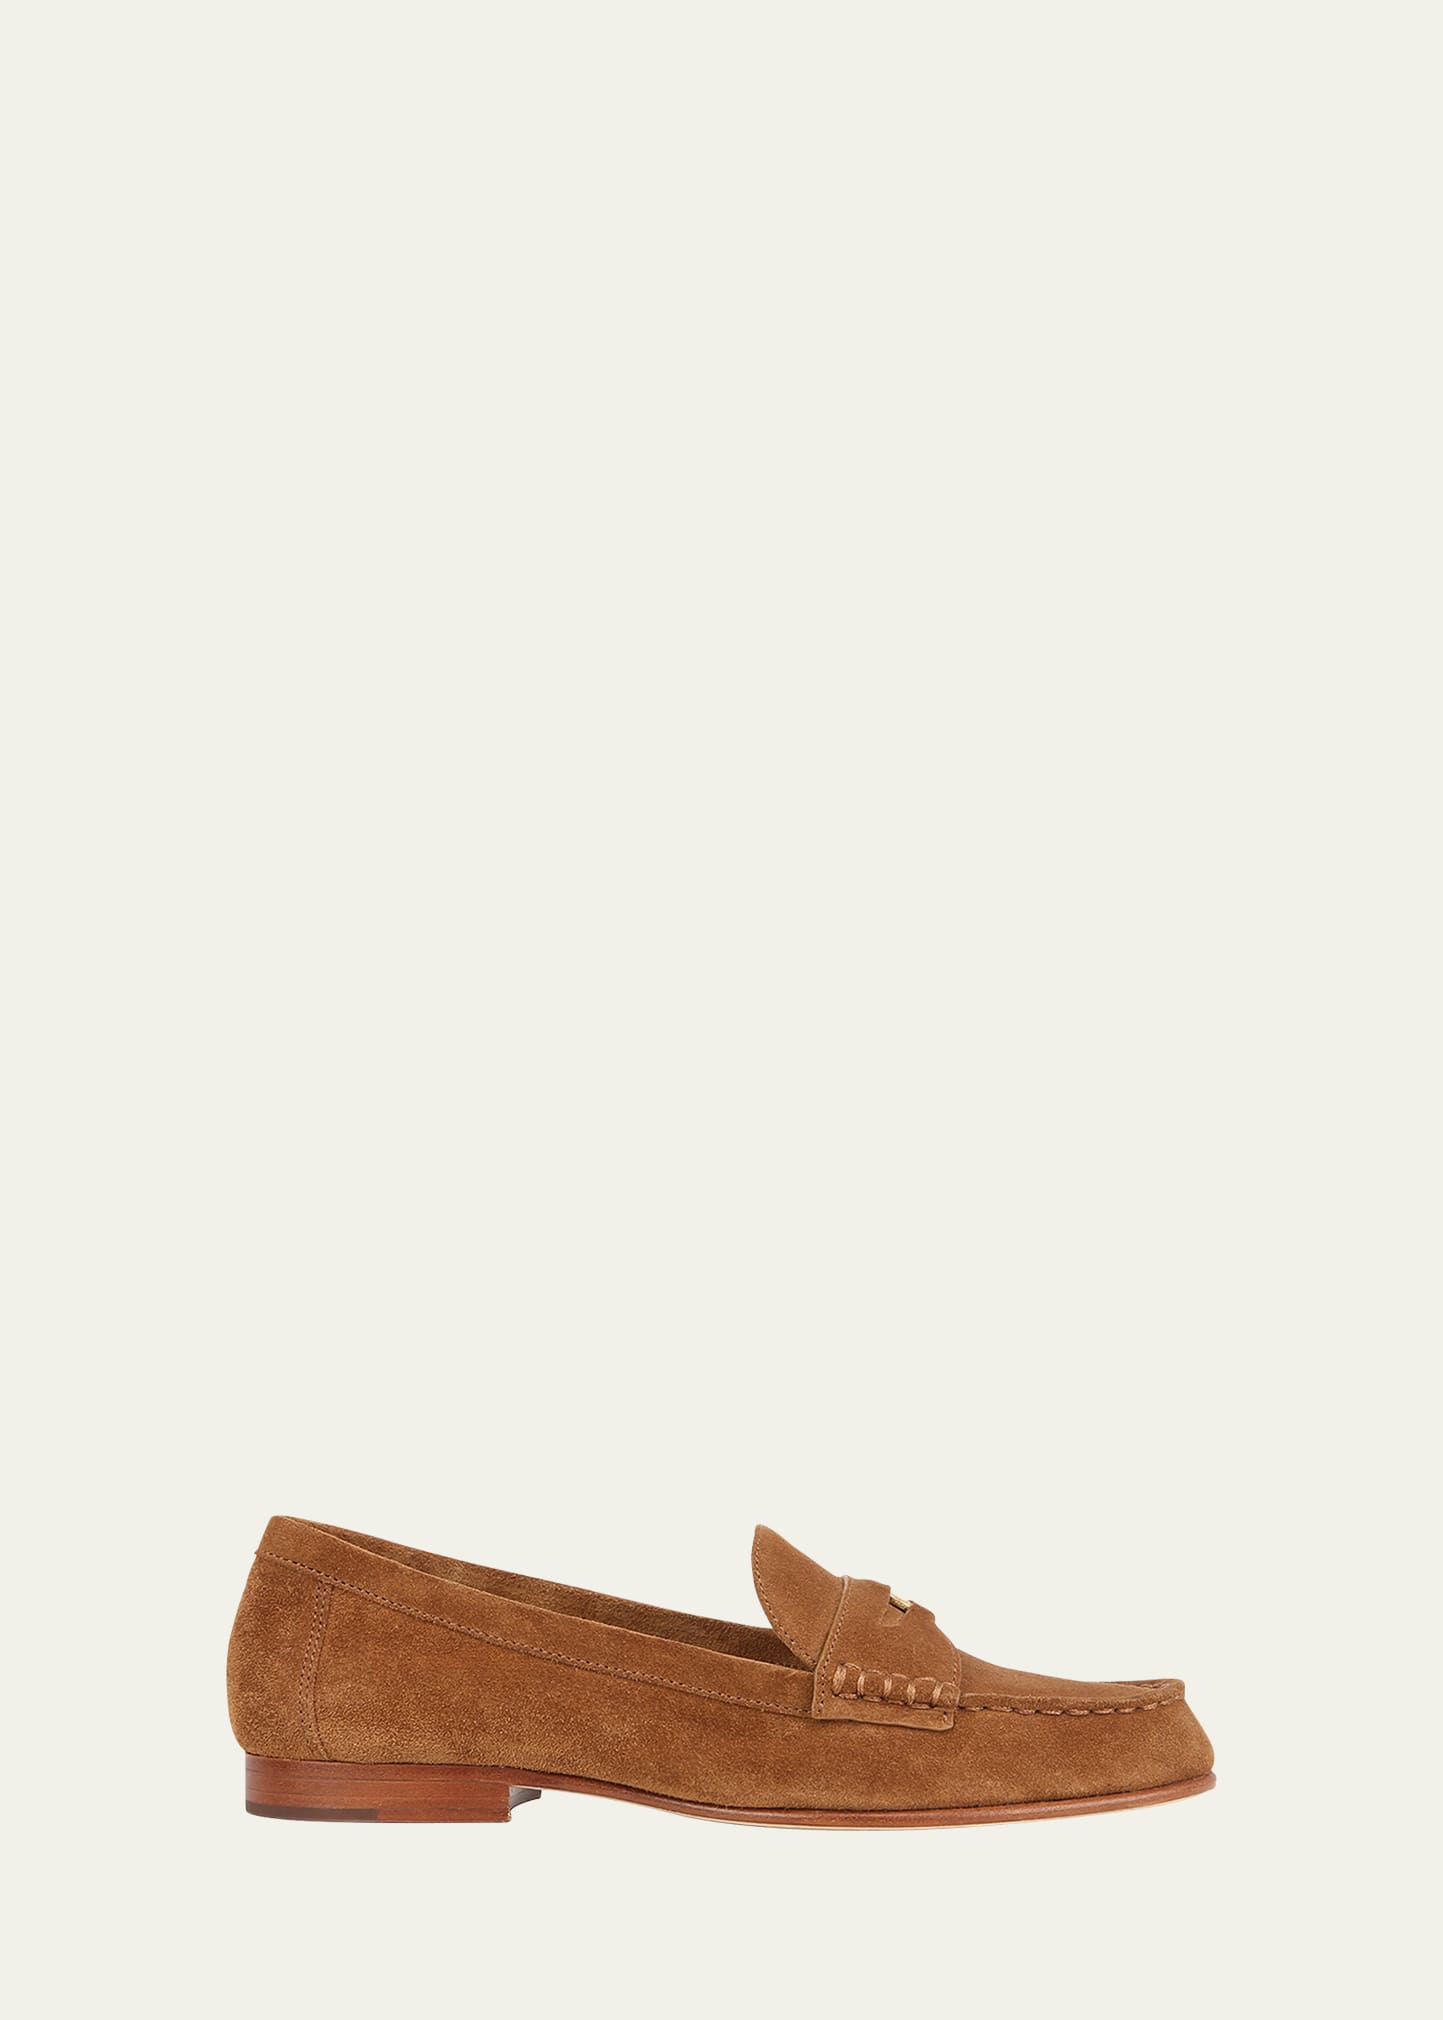 Suede Coin Penny Loafers